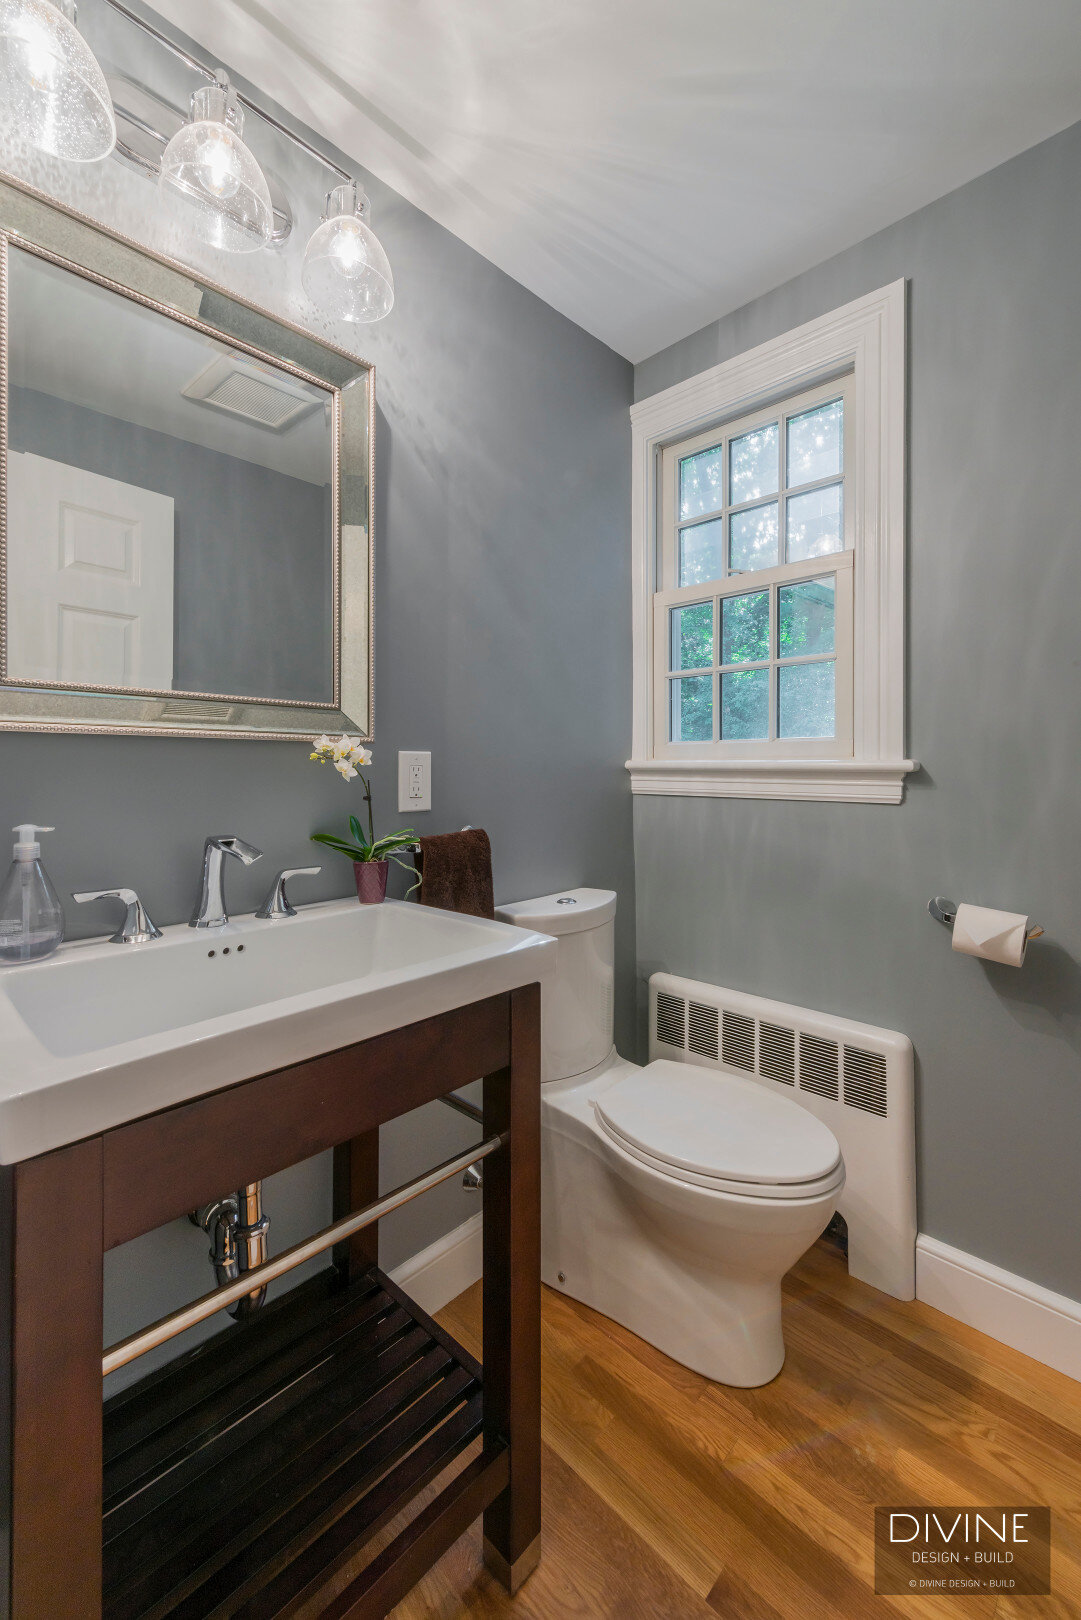  Powder room with transitional style vanity of dark wood and white porcelain sink basin. Blue wall paint. medium hardwood floors.